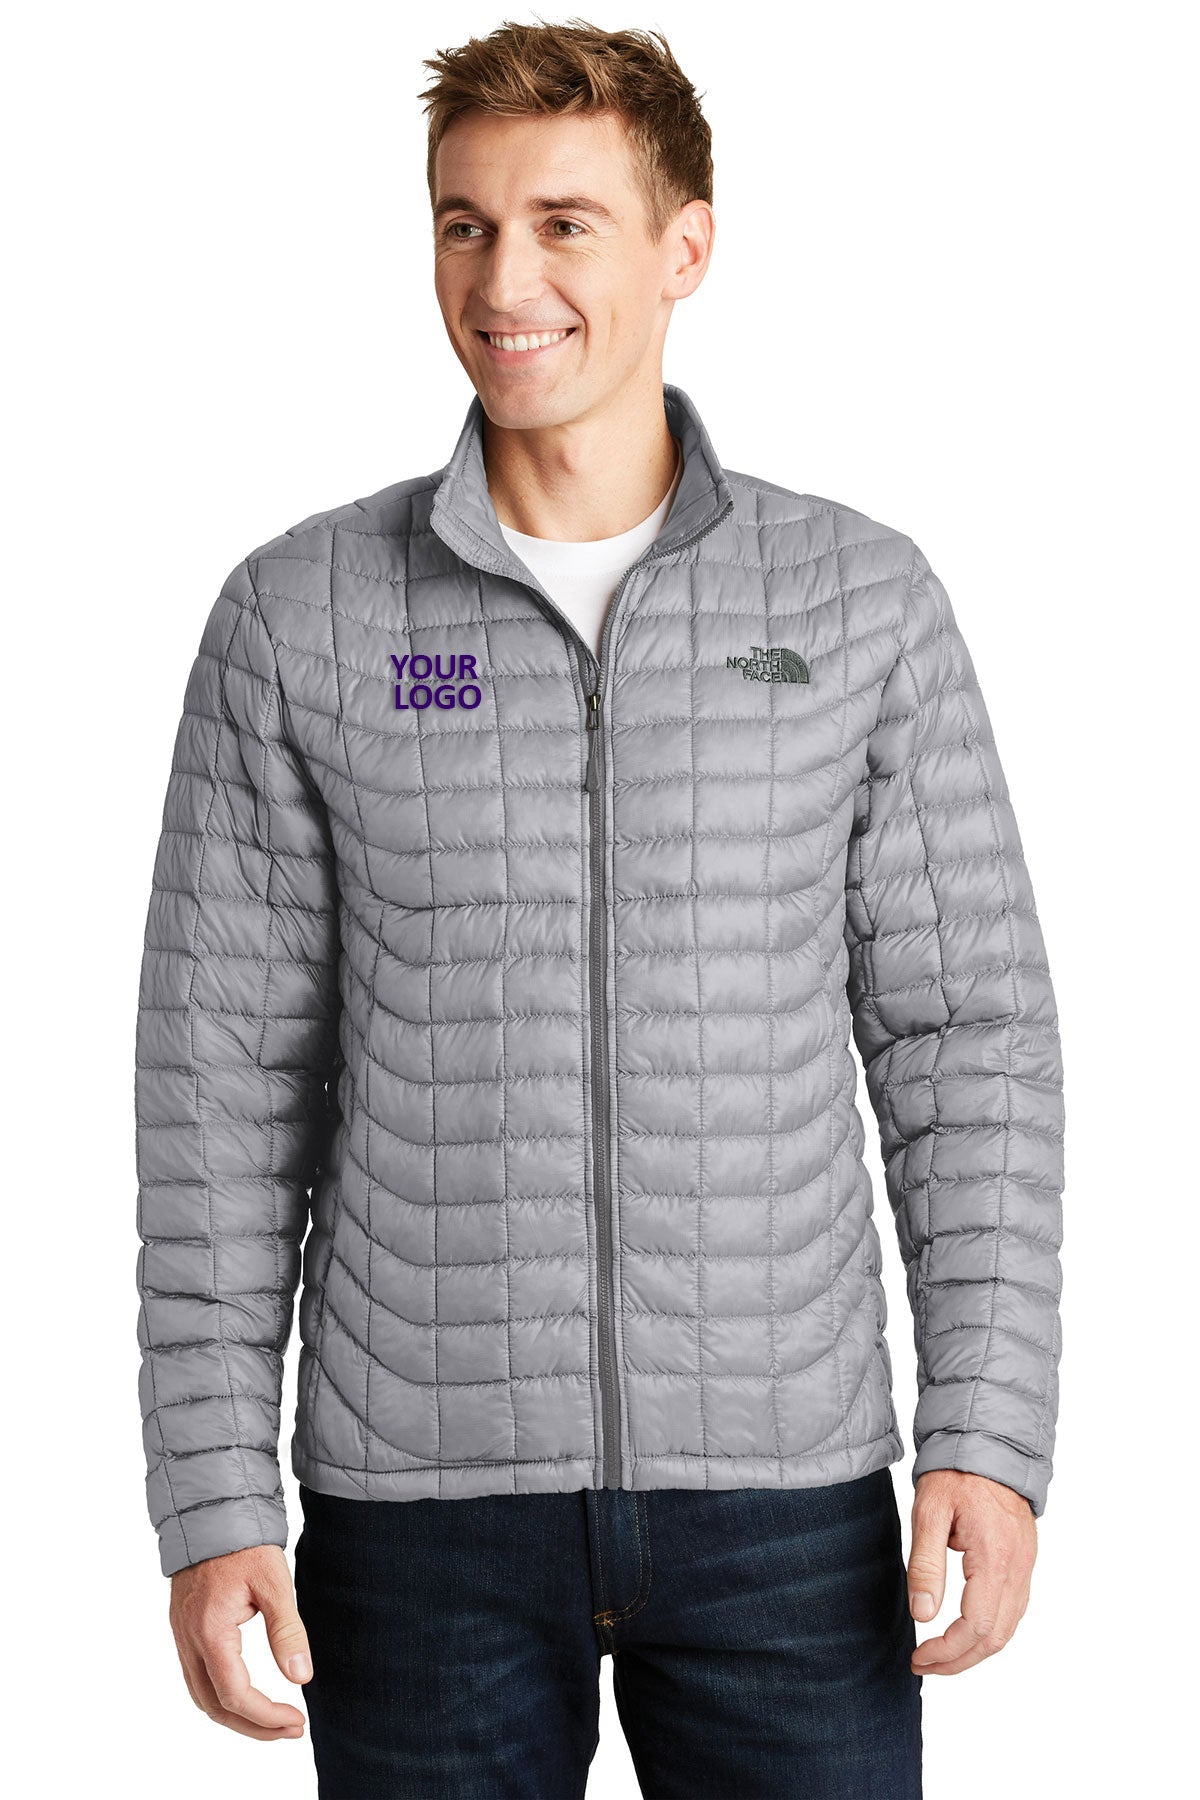 The North Face Mid Grey NF0A3LH2 business logo jackets